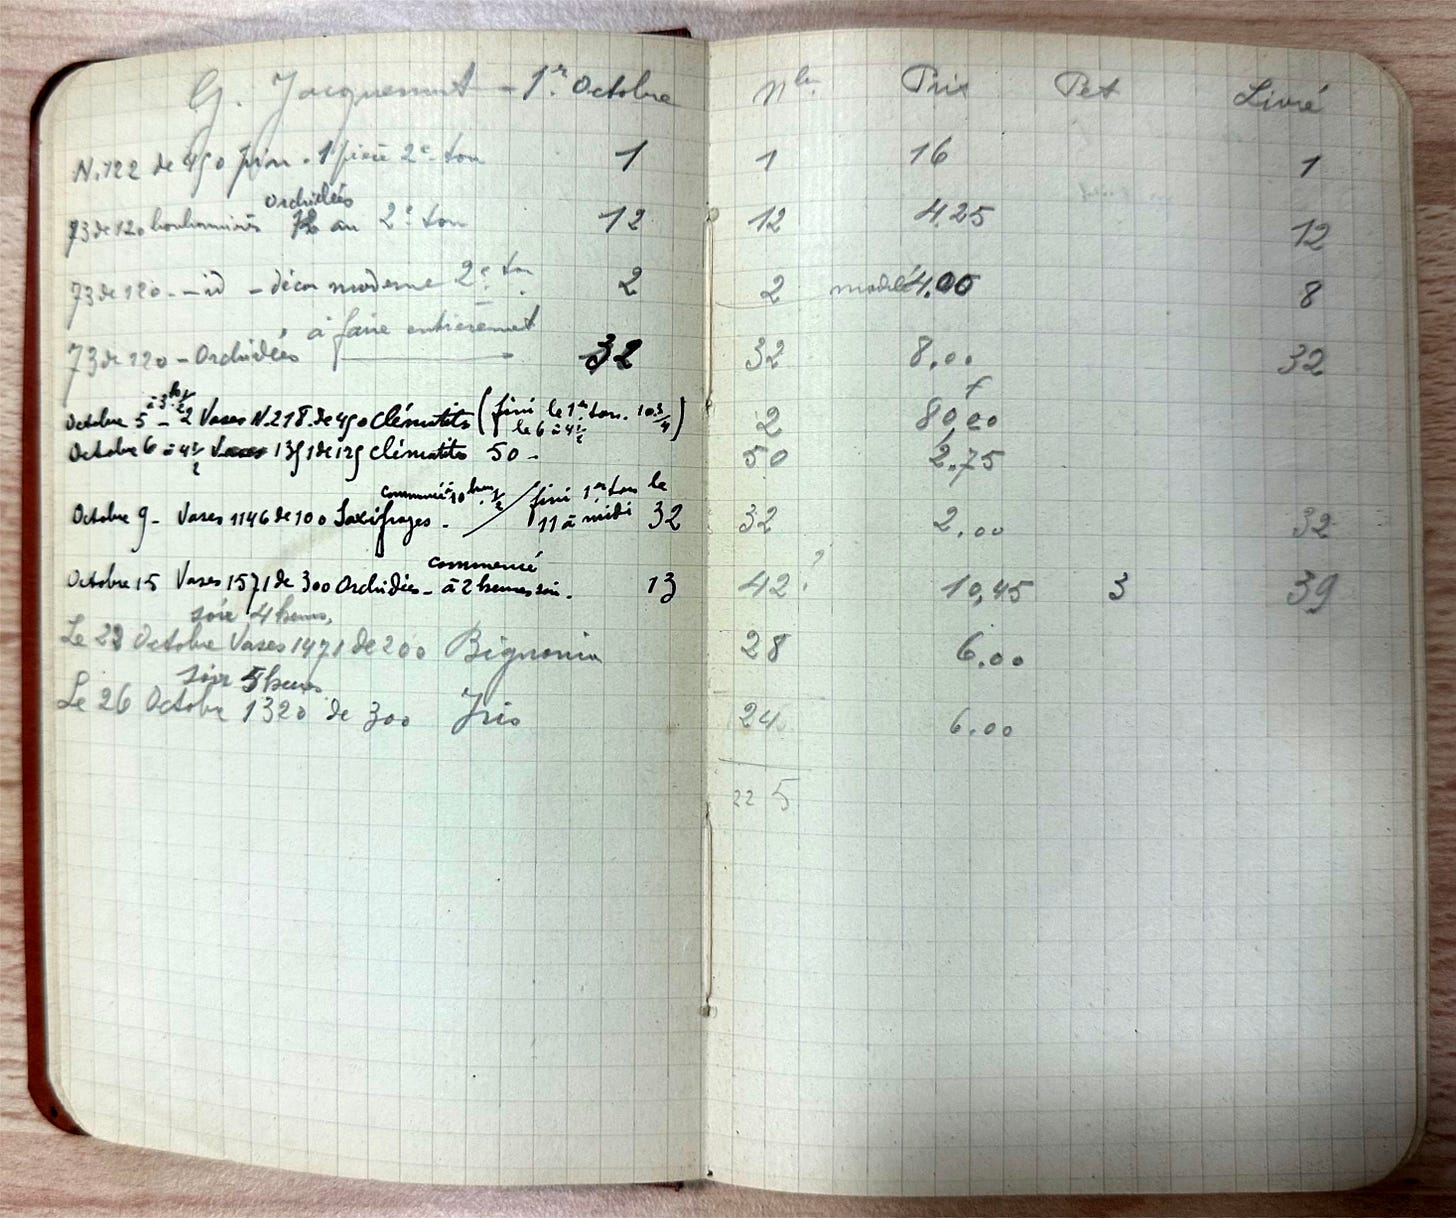 Paul Nicolas, notebook, showing a list of glass pieces decorated by Gaston Jacquemard, dated 1st October 1926, Archives municipales, Remiremont, 29S13 (courtesy of the Nicolas family).